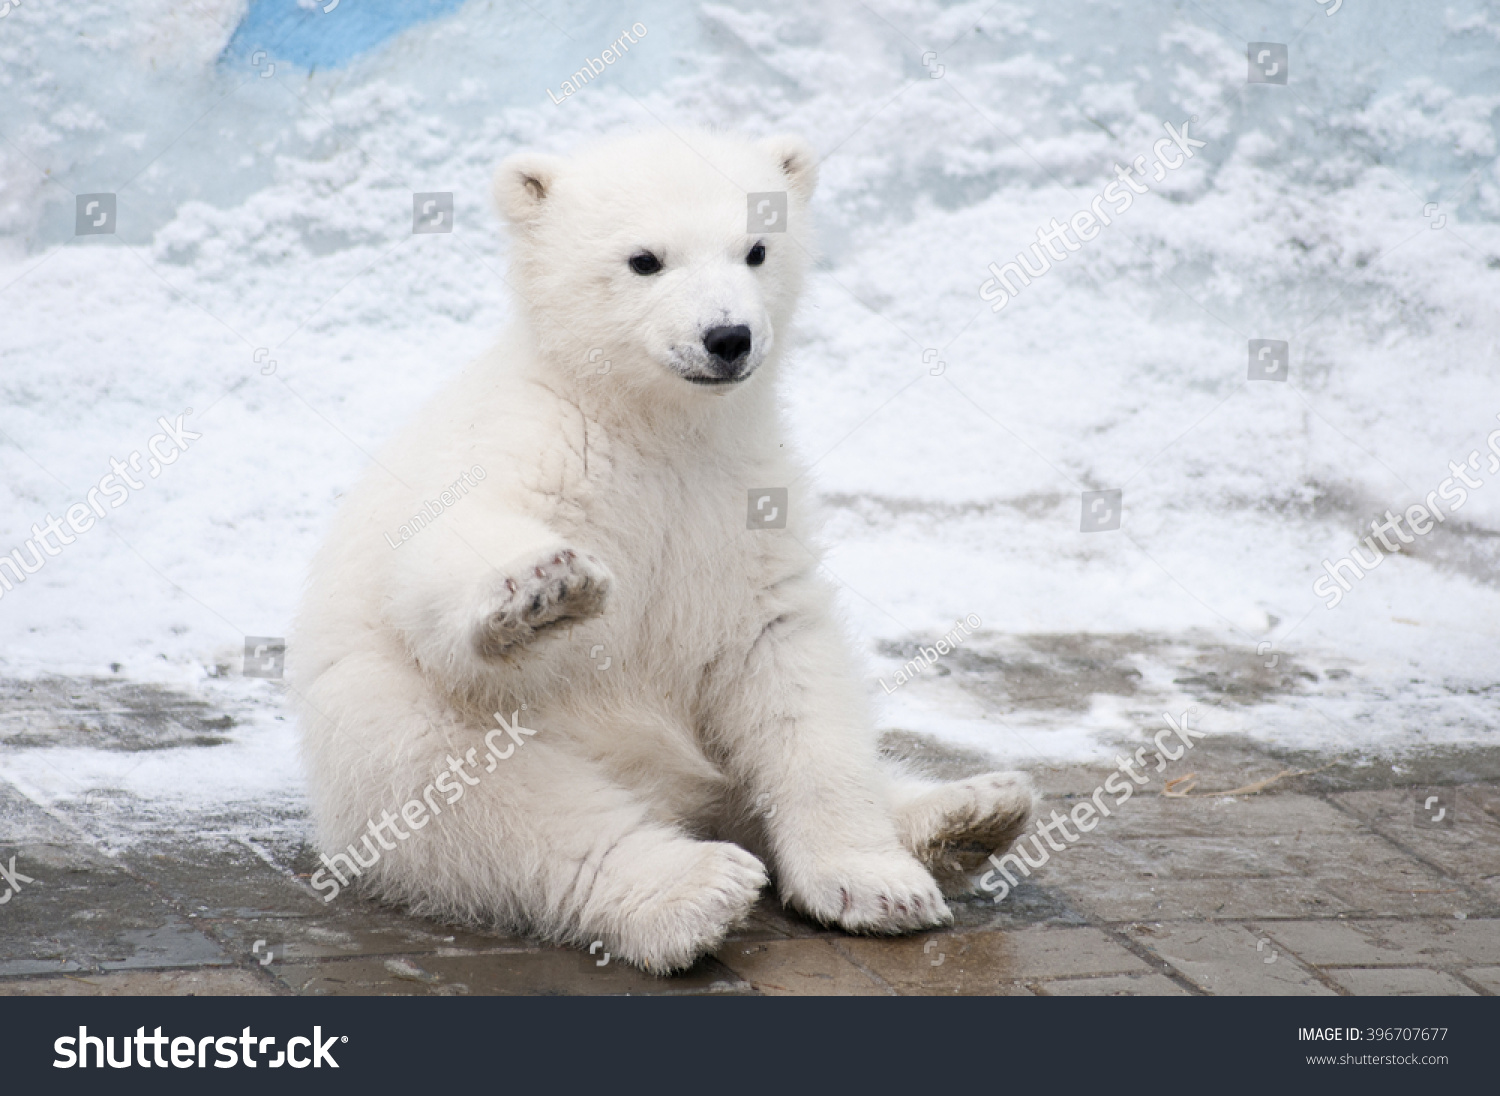 Little polar bear sits like a dog raising up his right paw #396707677